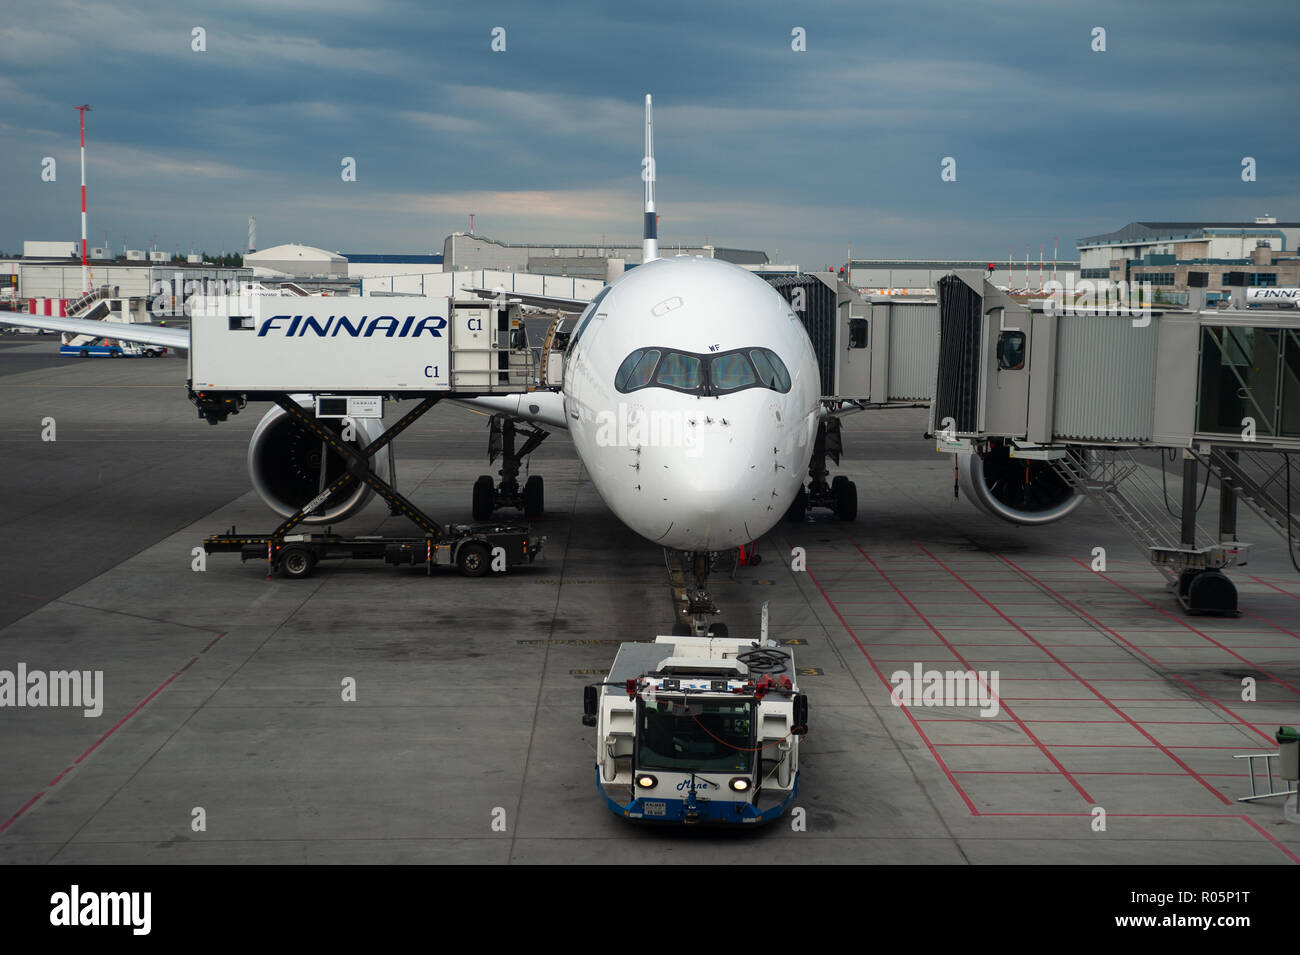 04.06.2018 - Helsinki, Finland, Europe - A Finnair Airbus A350 passenger plane is parked at a gate at Helsinki's airport Vantaa. Stock Photo